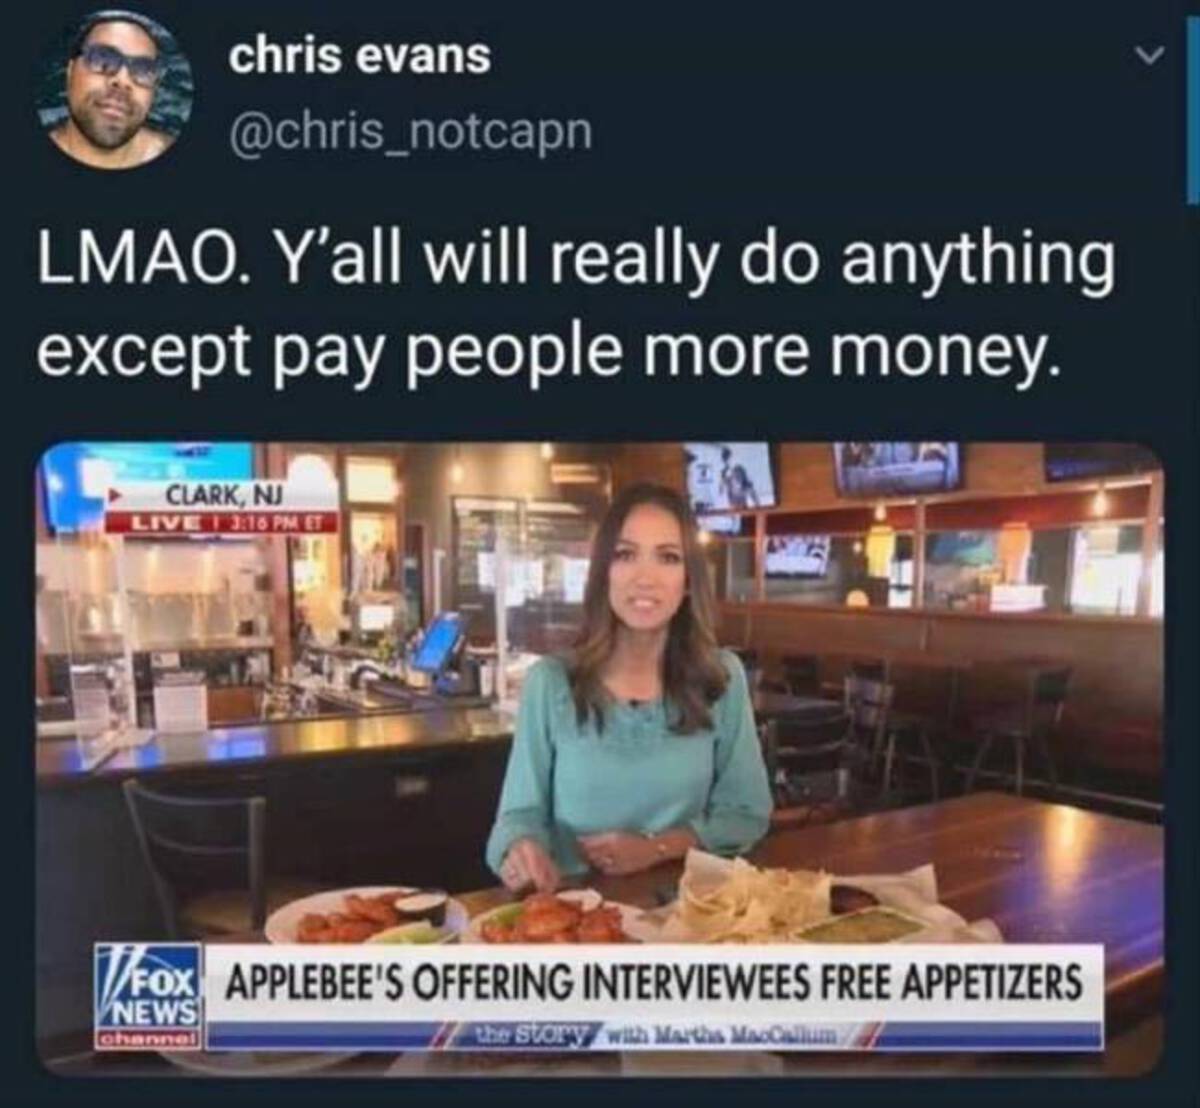 viennoiserie - chris evans Lmao. Y'all will really do anything except pay people more money. Clark, Nj Live Et VFox Fox Applebee'S Offering Interviewees Free Appetizers News channel the story with Martha MacCallum